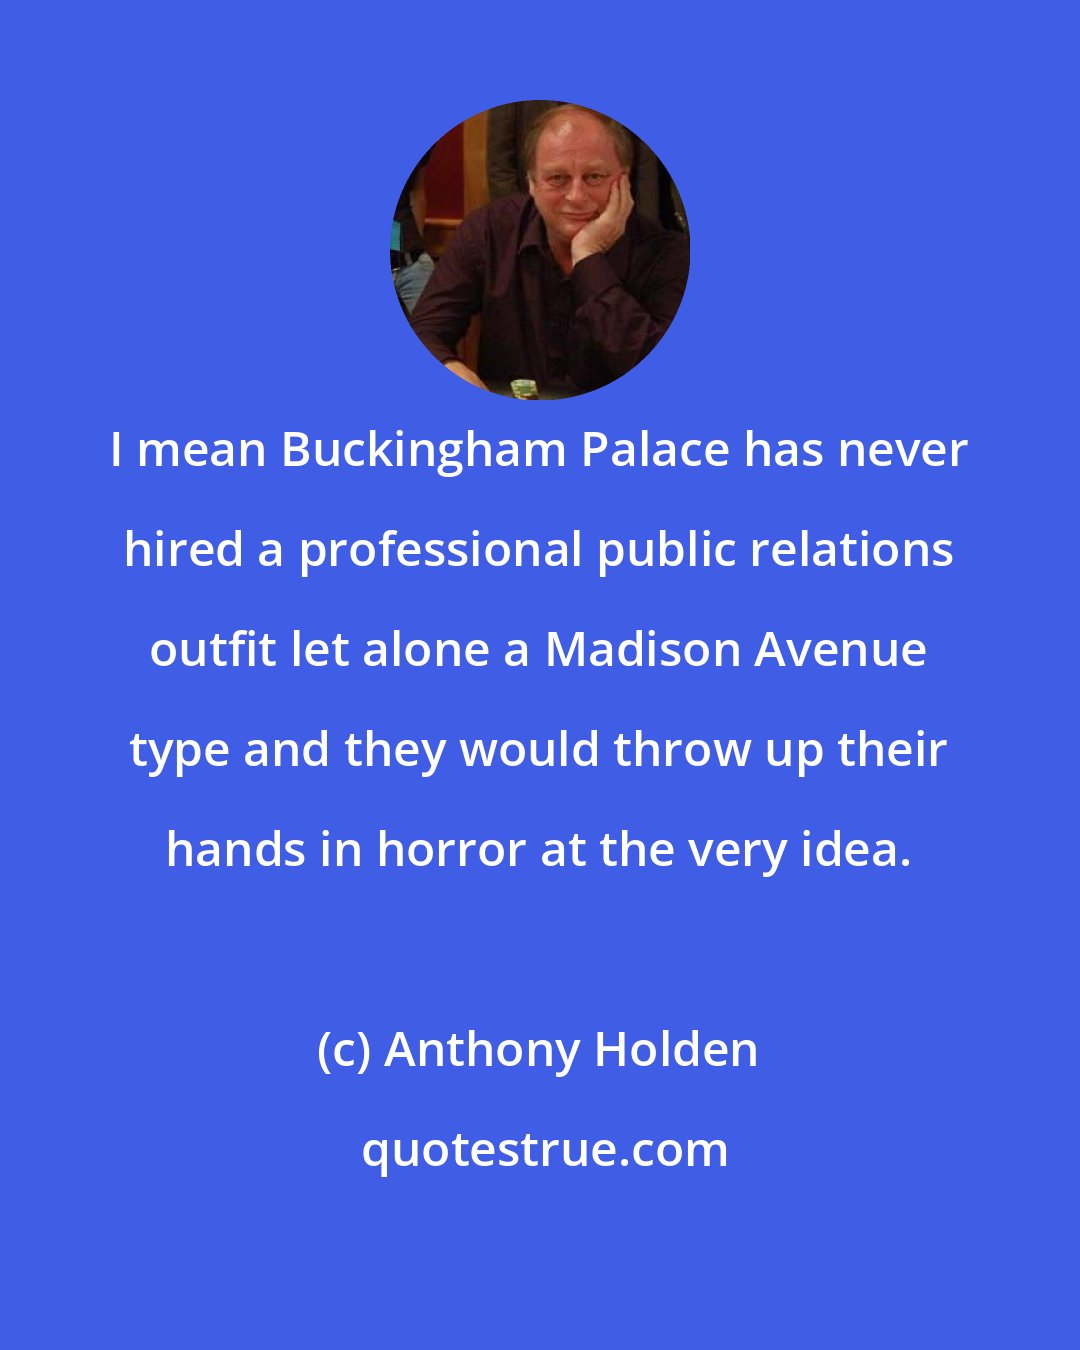 Anthony Holden: I mean Buckingham Palace has never hired a professional public relations outfit let alone a Madison Avenue type and they would throw up their hands in horror at the very idea.